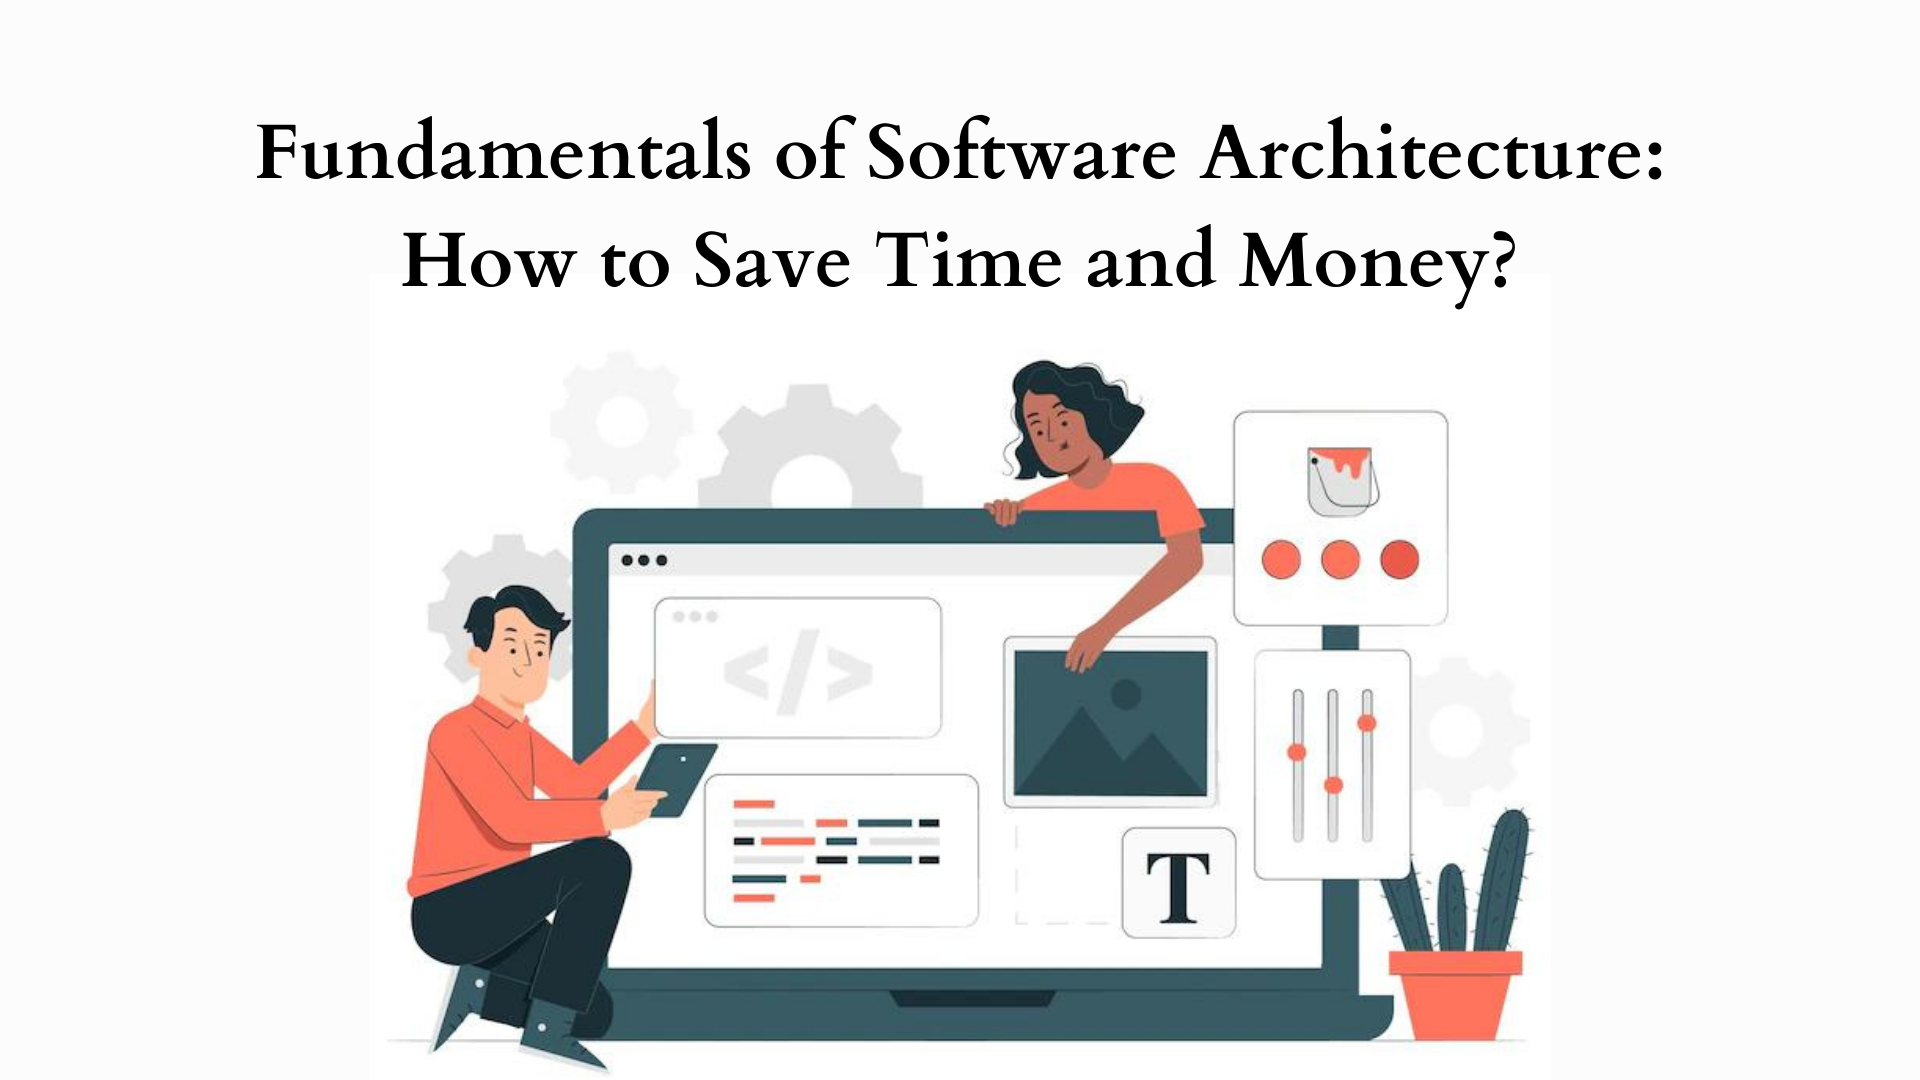 Fundamentals of Software Architecture: How to Save Time and Money?